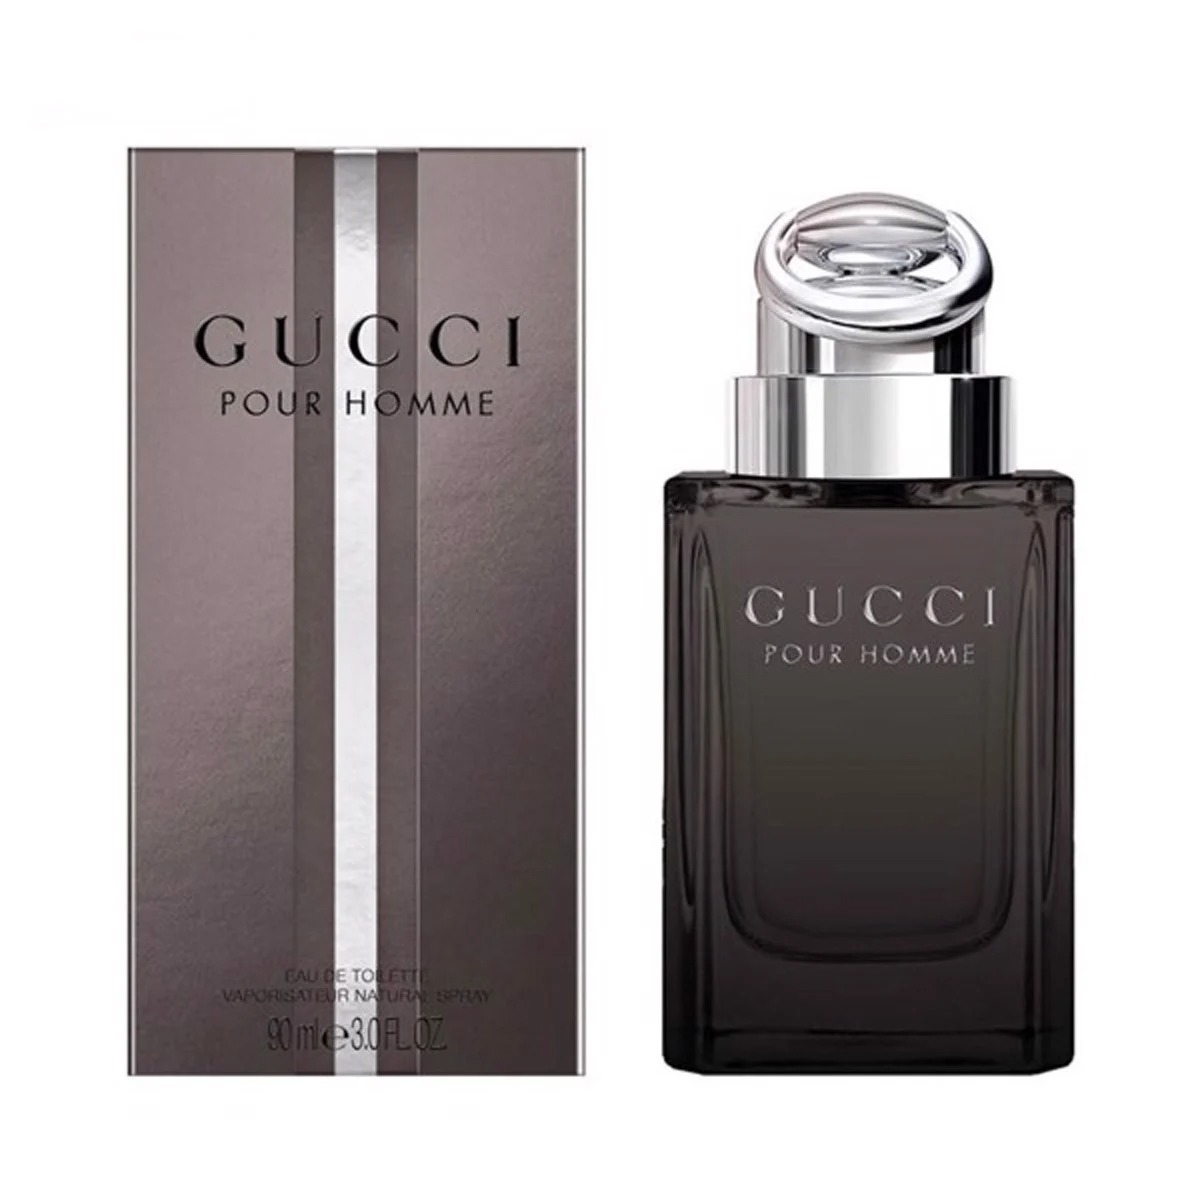 Gucci by Gucci Pour Homme 1